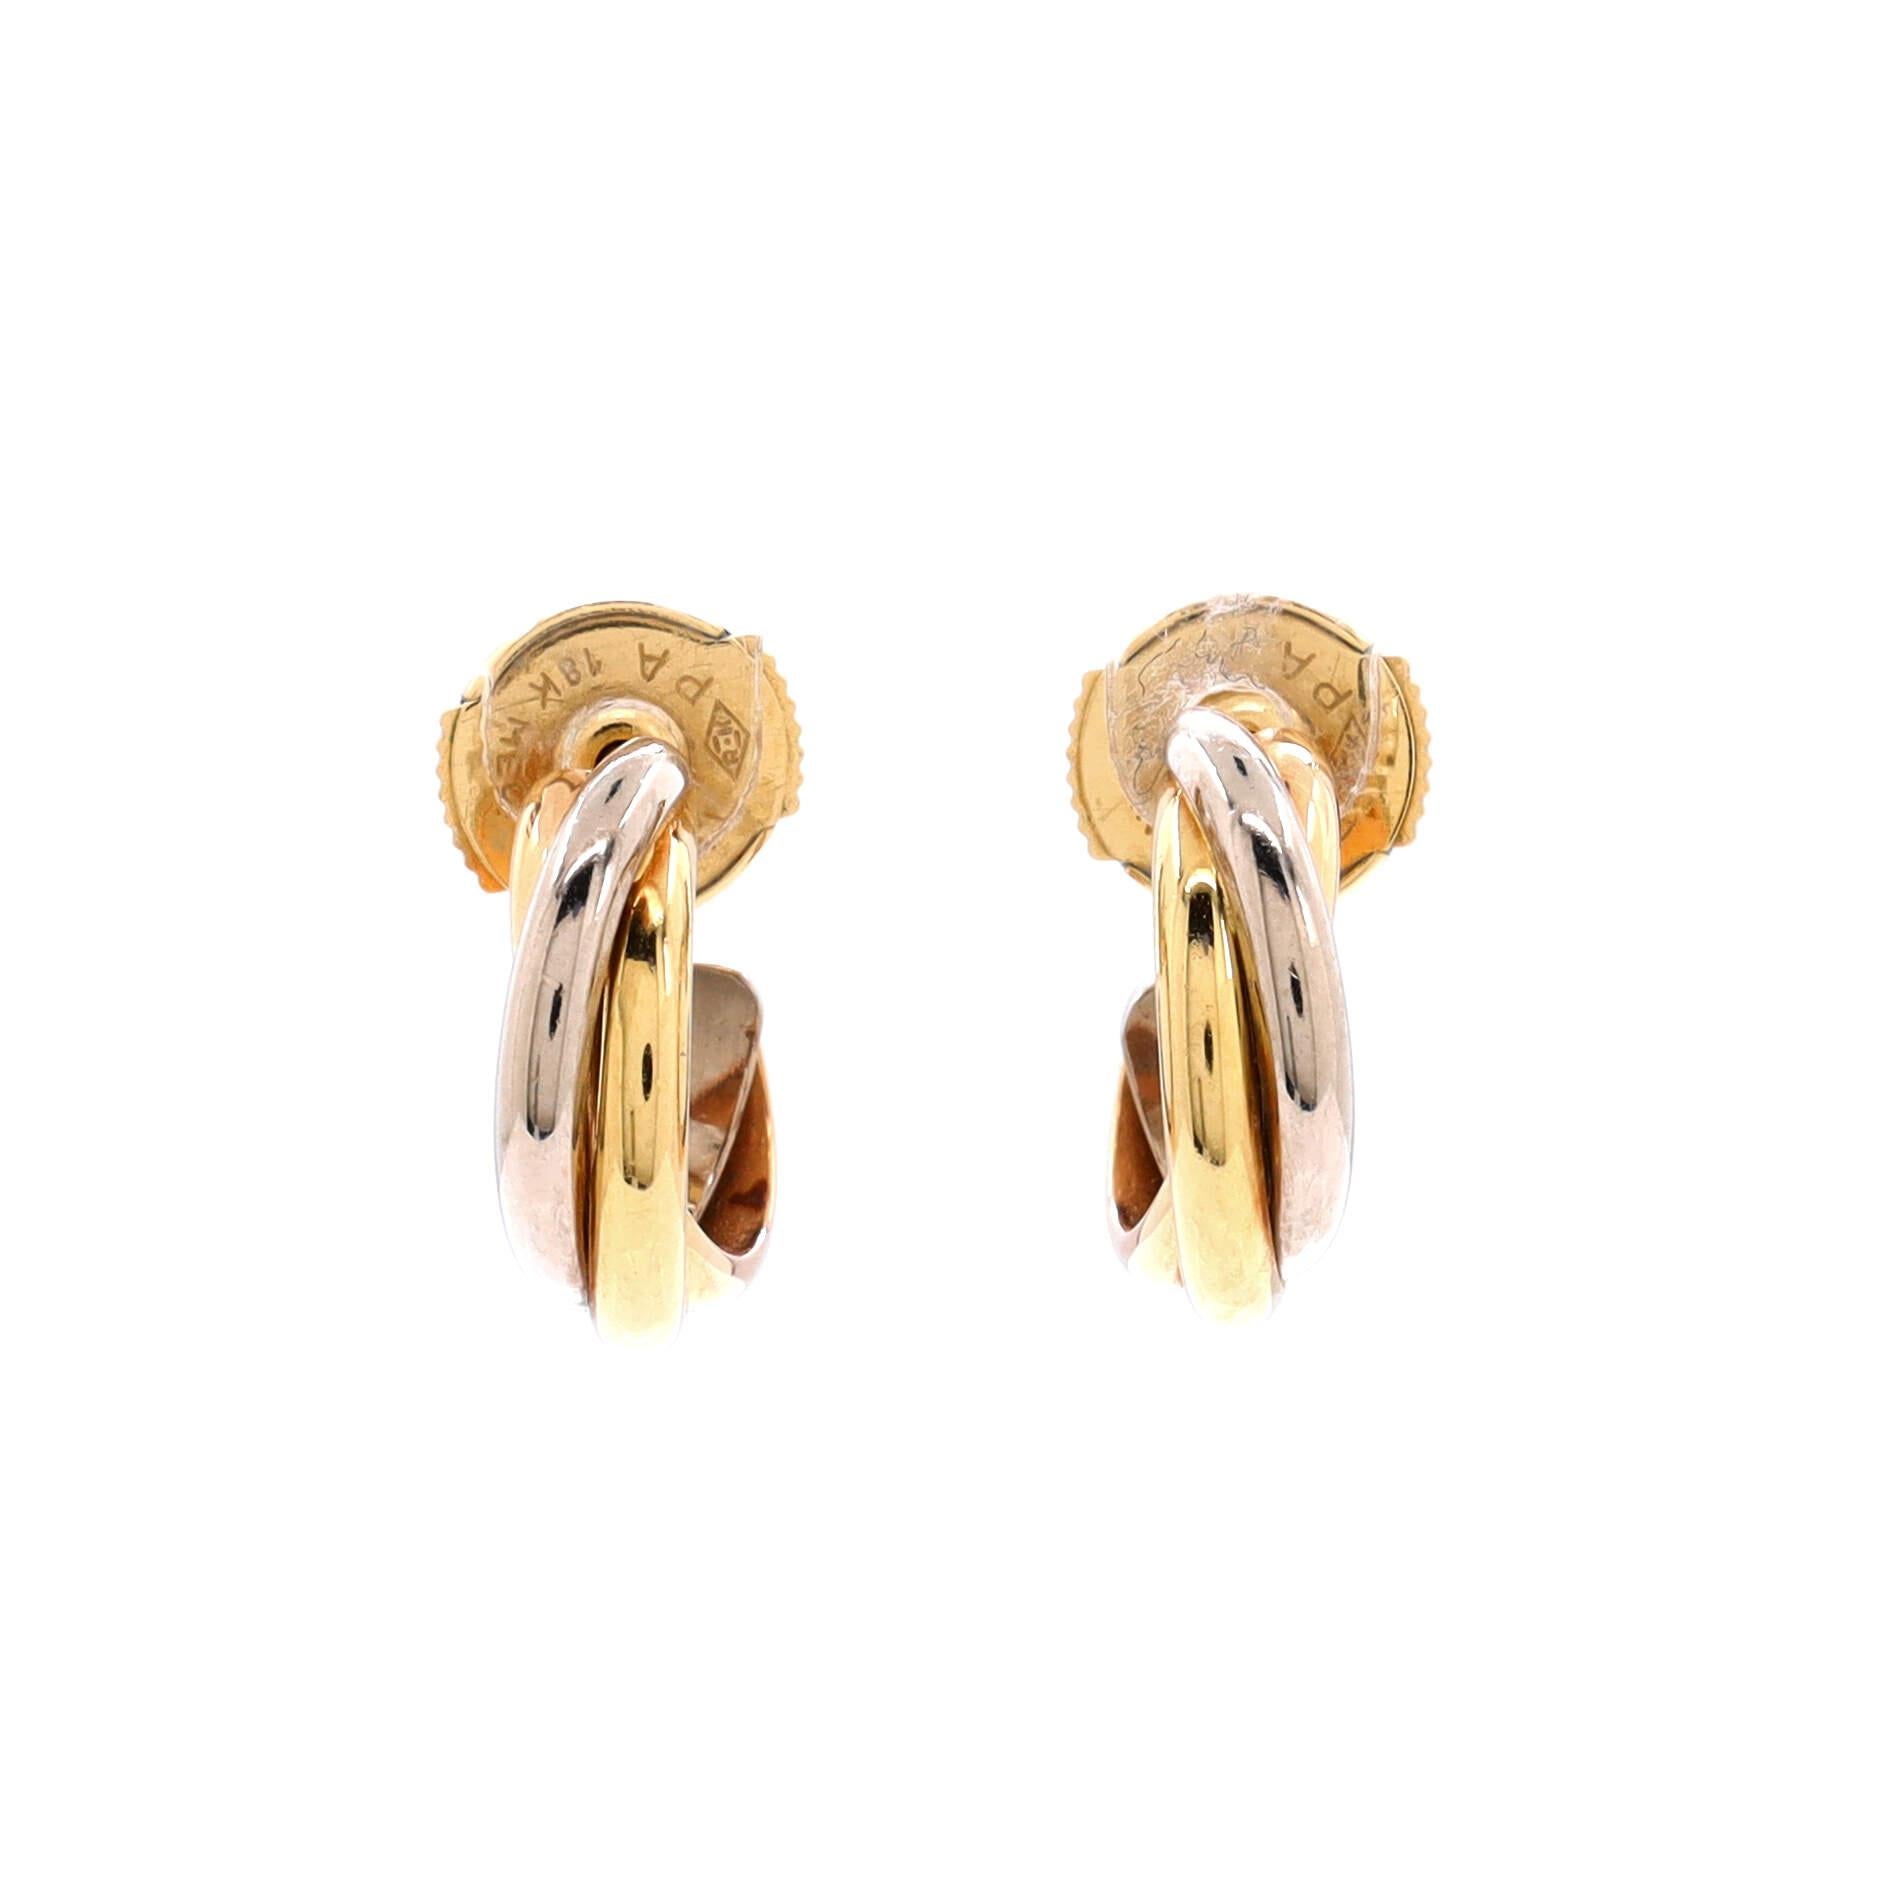 Condition: Very good. Moderate wear throughout.
Accessories: No Accessories
Measurements: Height/Length: 12.85 mm, Width: 3.85 mm
Designer: Cartier
Model: Trinity Hoop Earrings 18K Tricolor Gold
Exterior Color: Tricolor Gold
Item Number: 208648/436